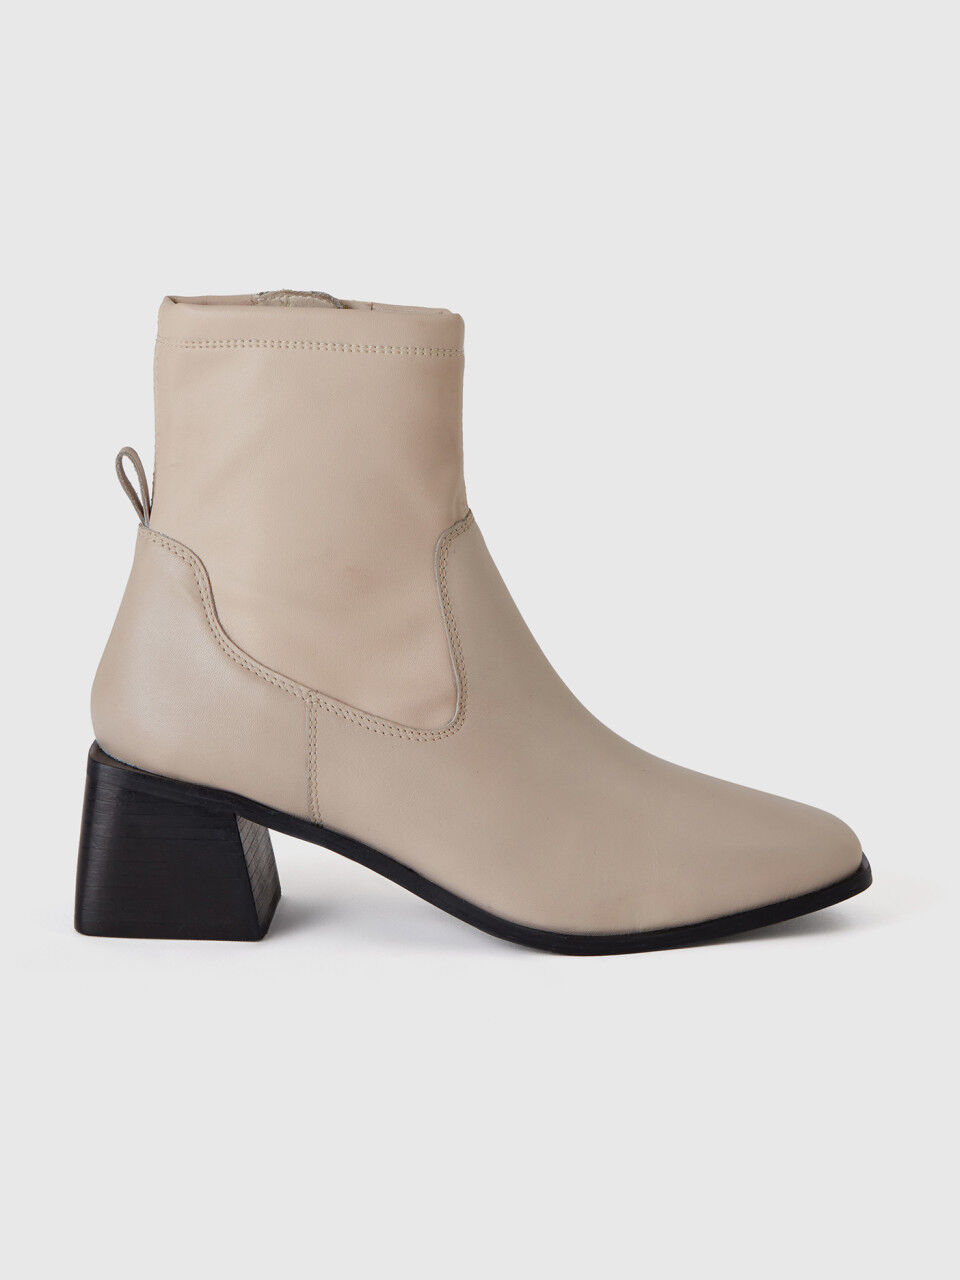 Ankle boots with wide heel